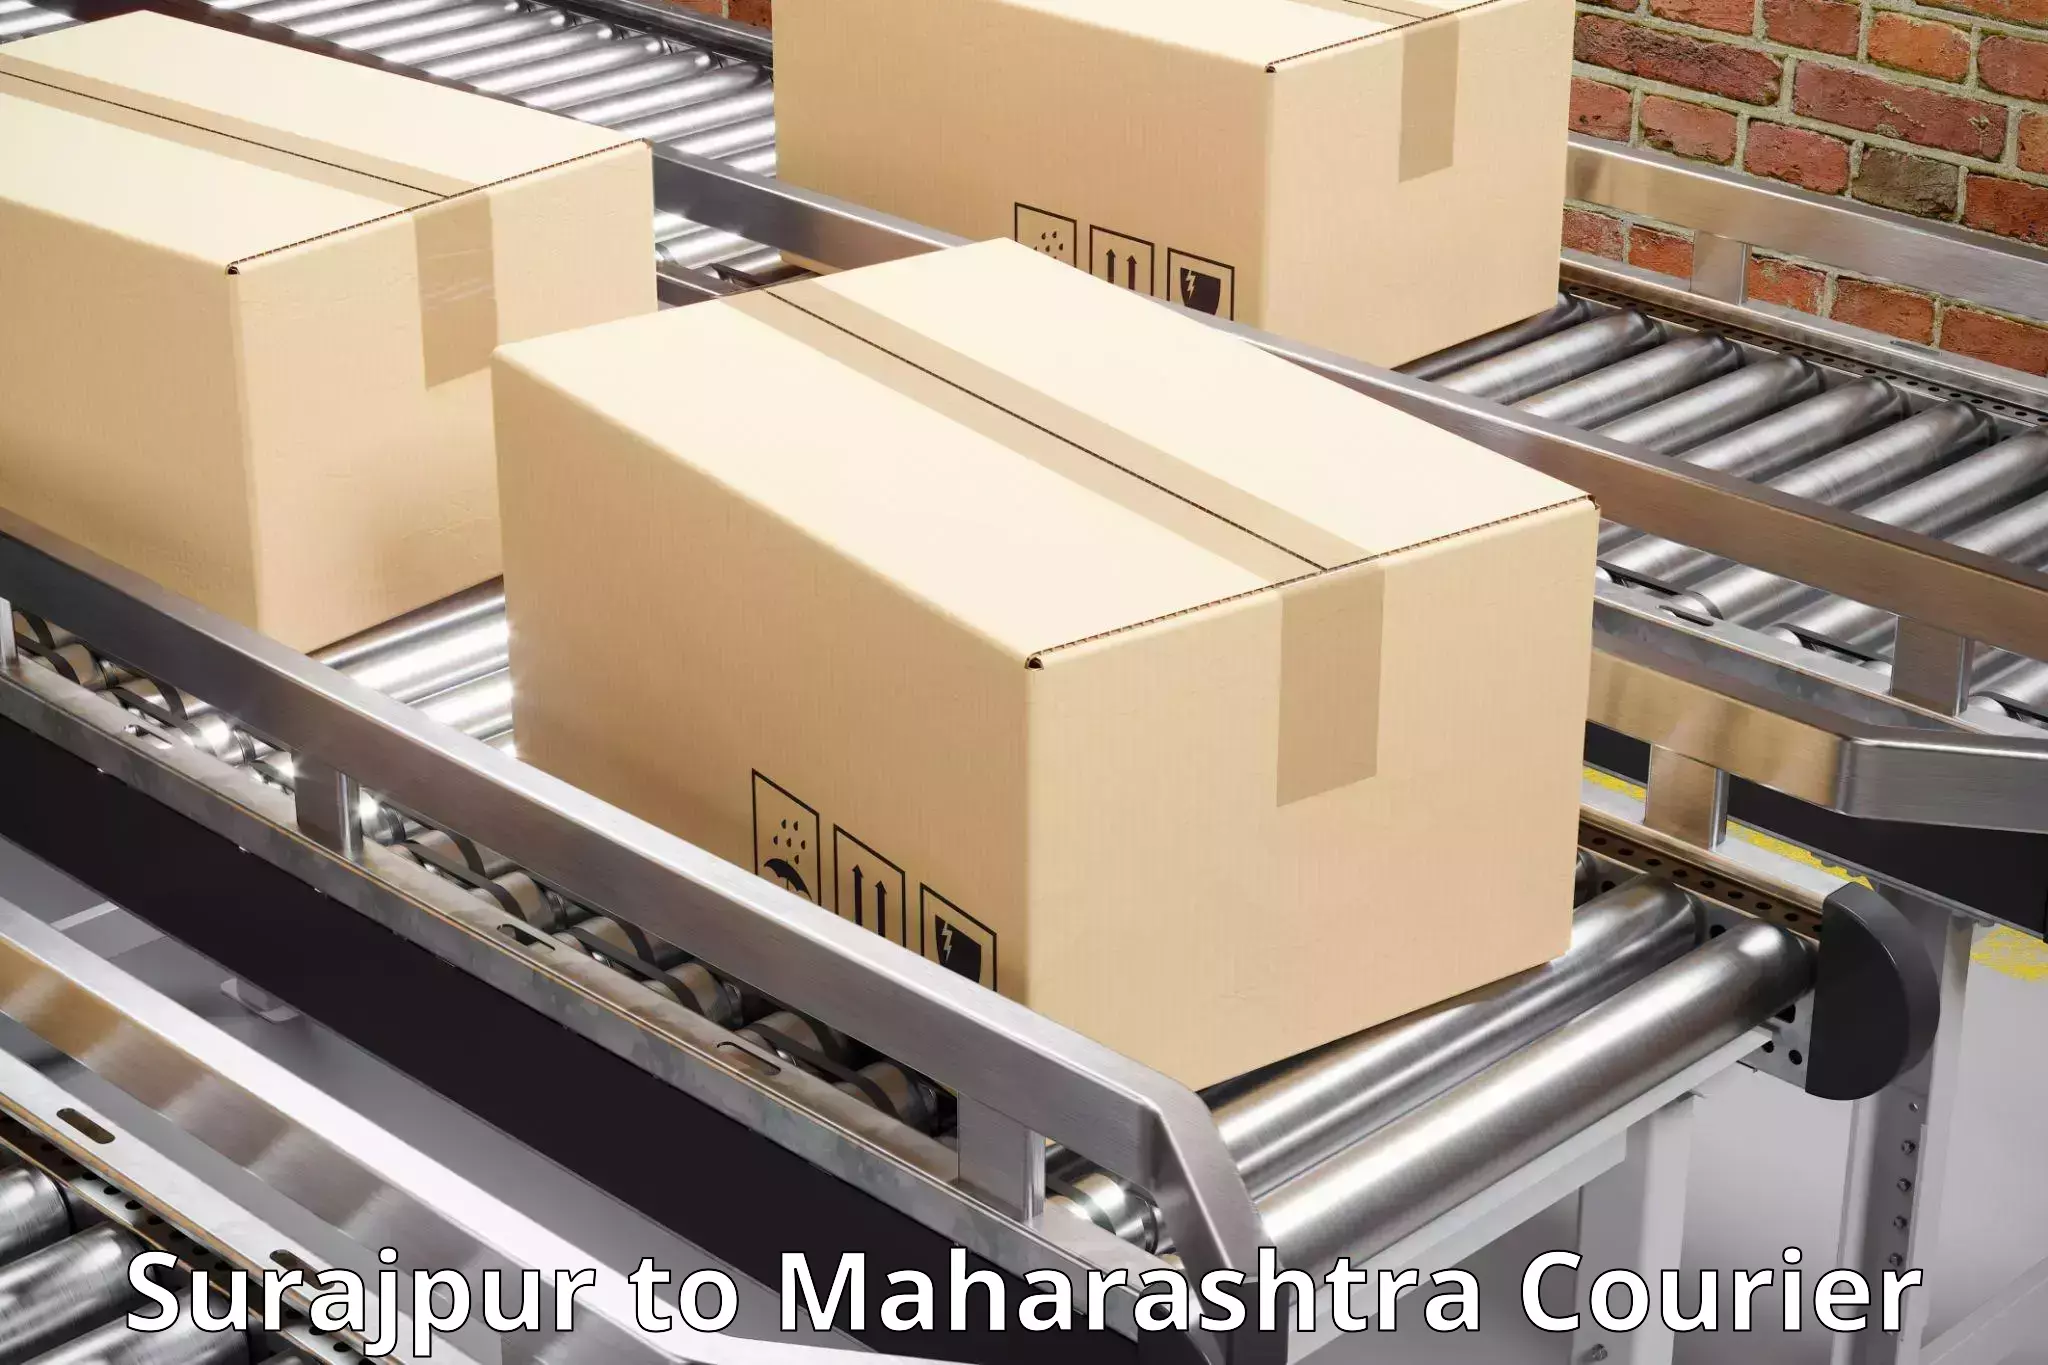 Courier service innovation Surajpur to Dhule